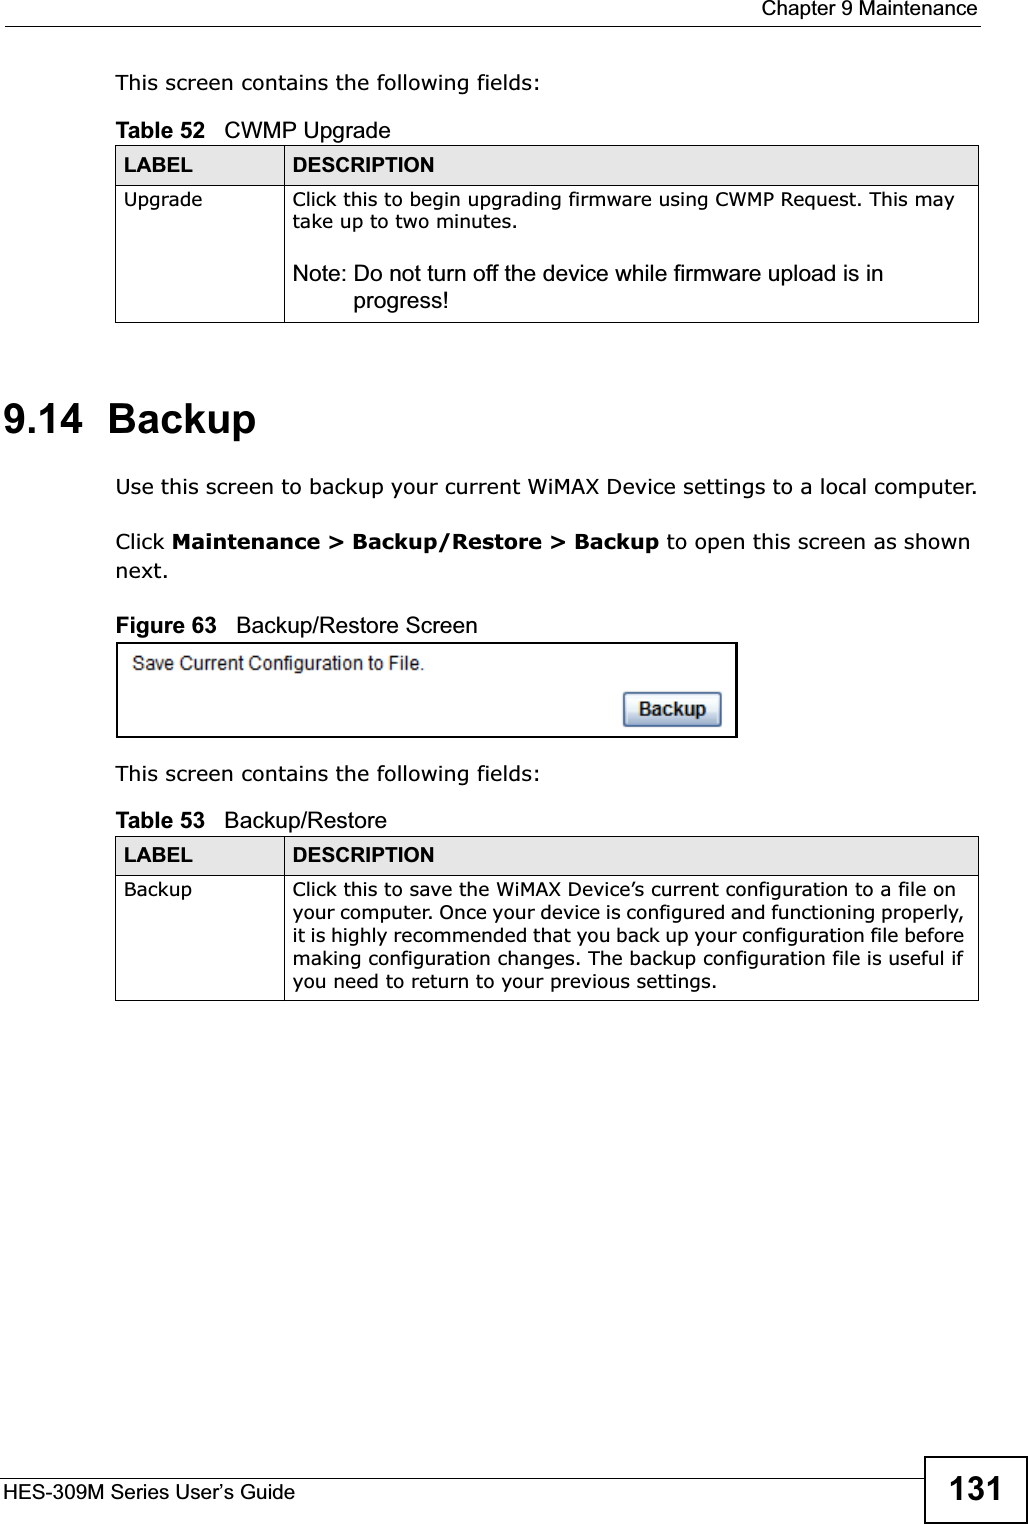  Chapter 9 MaintenanceHES-309M Series User’s Guide 131This screen contains the following fields:9.14  BackupUse this screen to backup your current WiMAX Device settings to a local computer.Click Maintenance &gt; Backup/Restore &gt; Backup to open this screen as shown next.Figure 63   Backup/Restore ScreenThis screen contains the following fields:Table 52   CWMP UpgradeLABEL DESCRIPTIONUpgrade  Click this to begin upgrading firmware using CWMP Request. This may take up to two minutes.Note: Do not turn off the device while firmware upload is in progress!Table 53   Backup/RestoreLABEL DESCRIPTIONBackup Click this to save the WiMAX Device’s current configuration to a file on your computer. Once your device is configured and functioning properly, it is highly recommended that you back up your configuration file before making configuration changes. The backup configuration file is useful if you need to return to your previous settings.